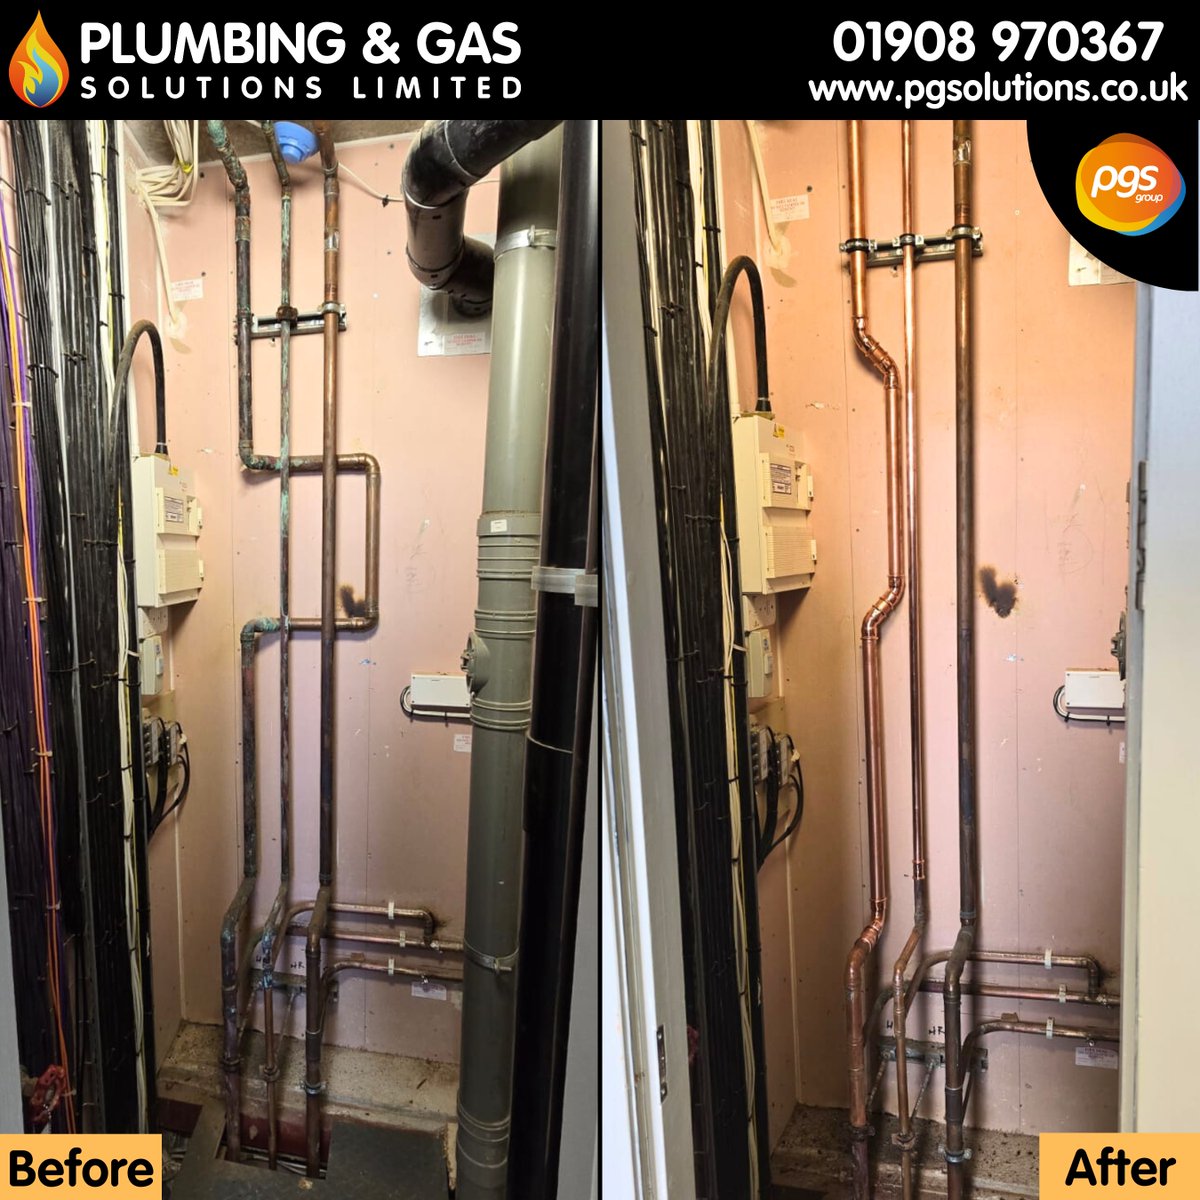 We completely replaced this pipework for a client. We replaced it all with new pipe, which will reduce the risk of a leak. Our technician also recognised that the pipework could be configured more efficiently, so we made some minor adjustments. 01908 970367 📞